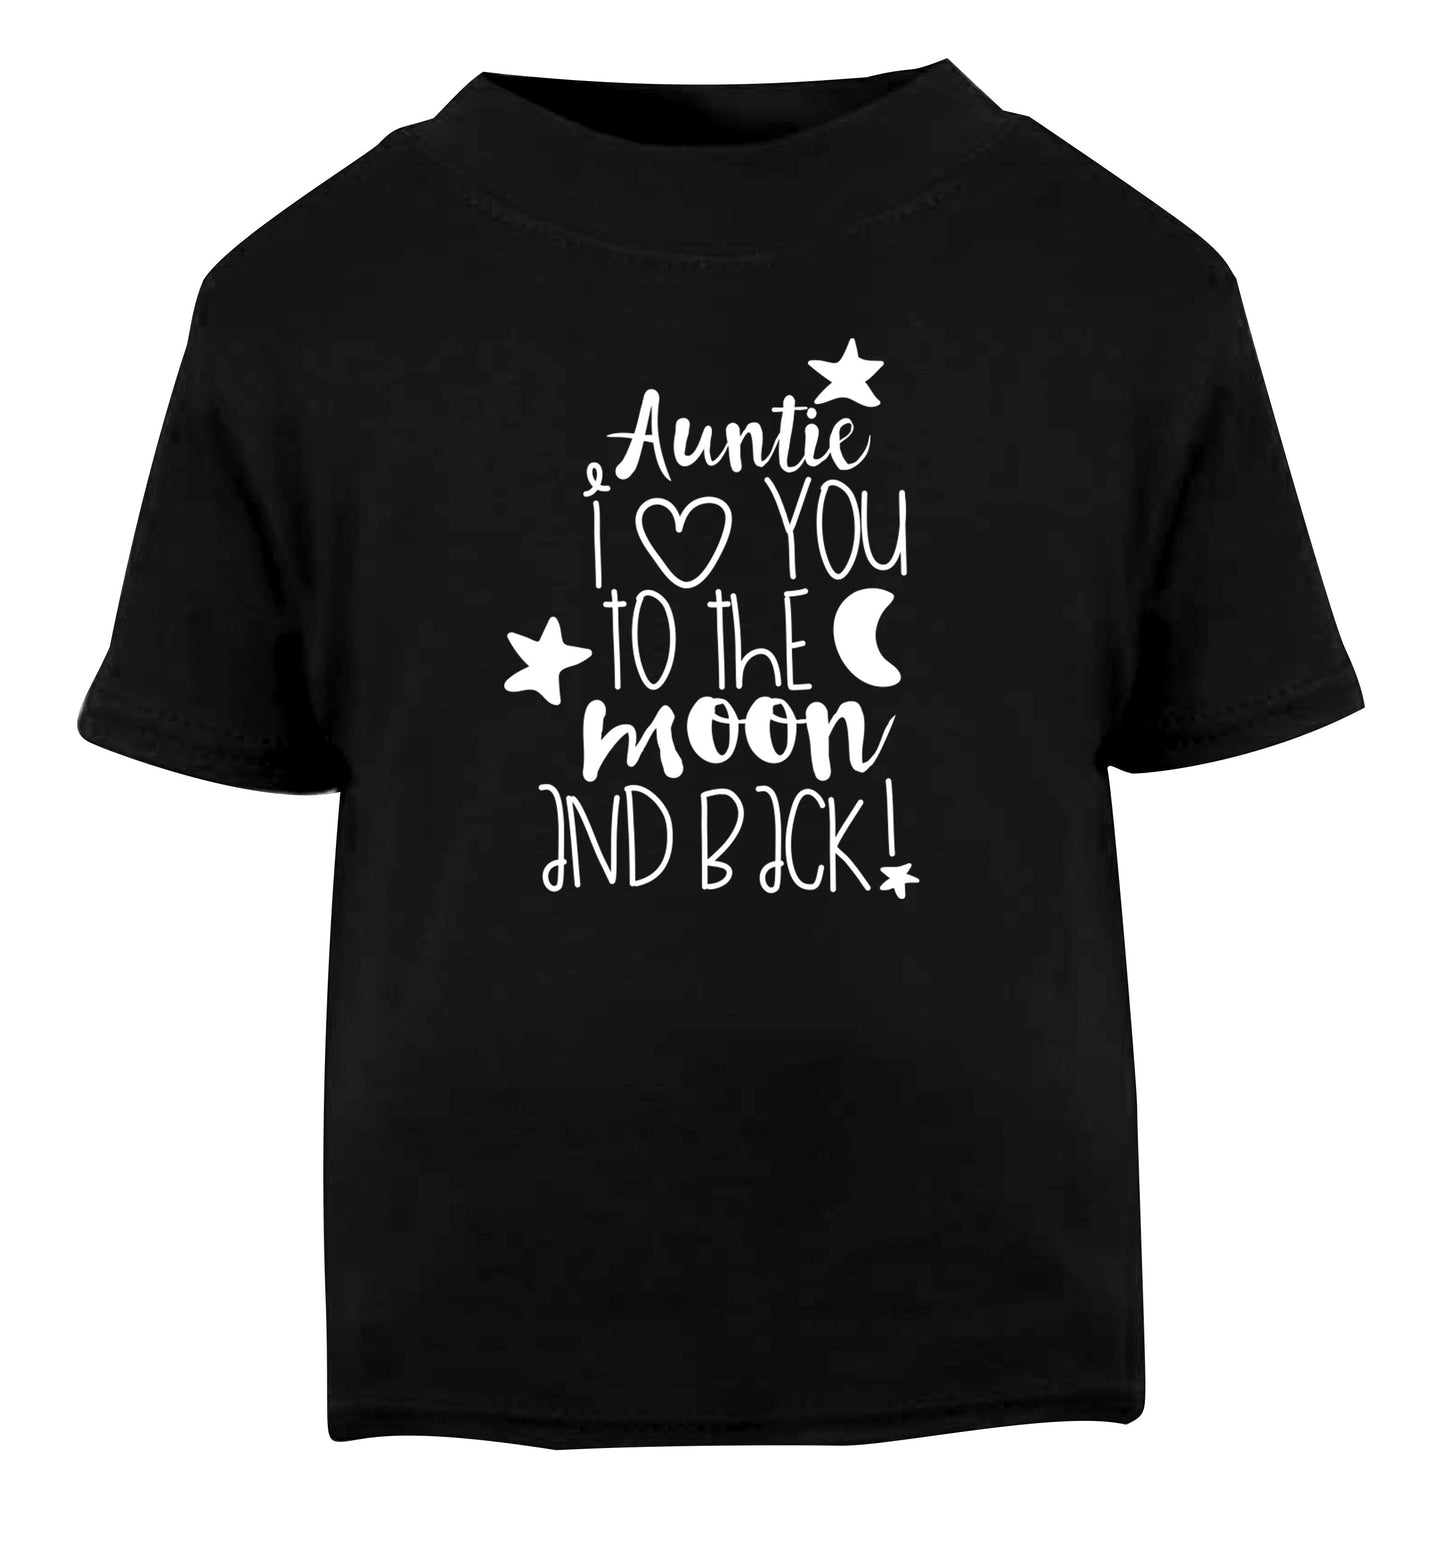 Auntie I love you to the moon and back Black Baby Toddler Tshirt 2 years